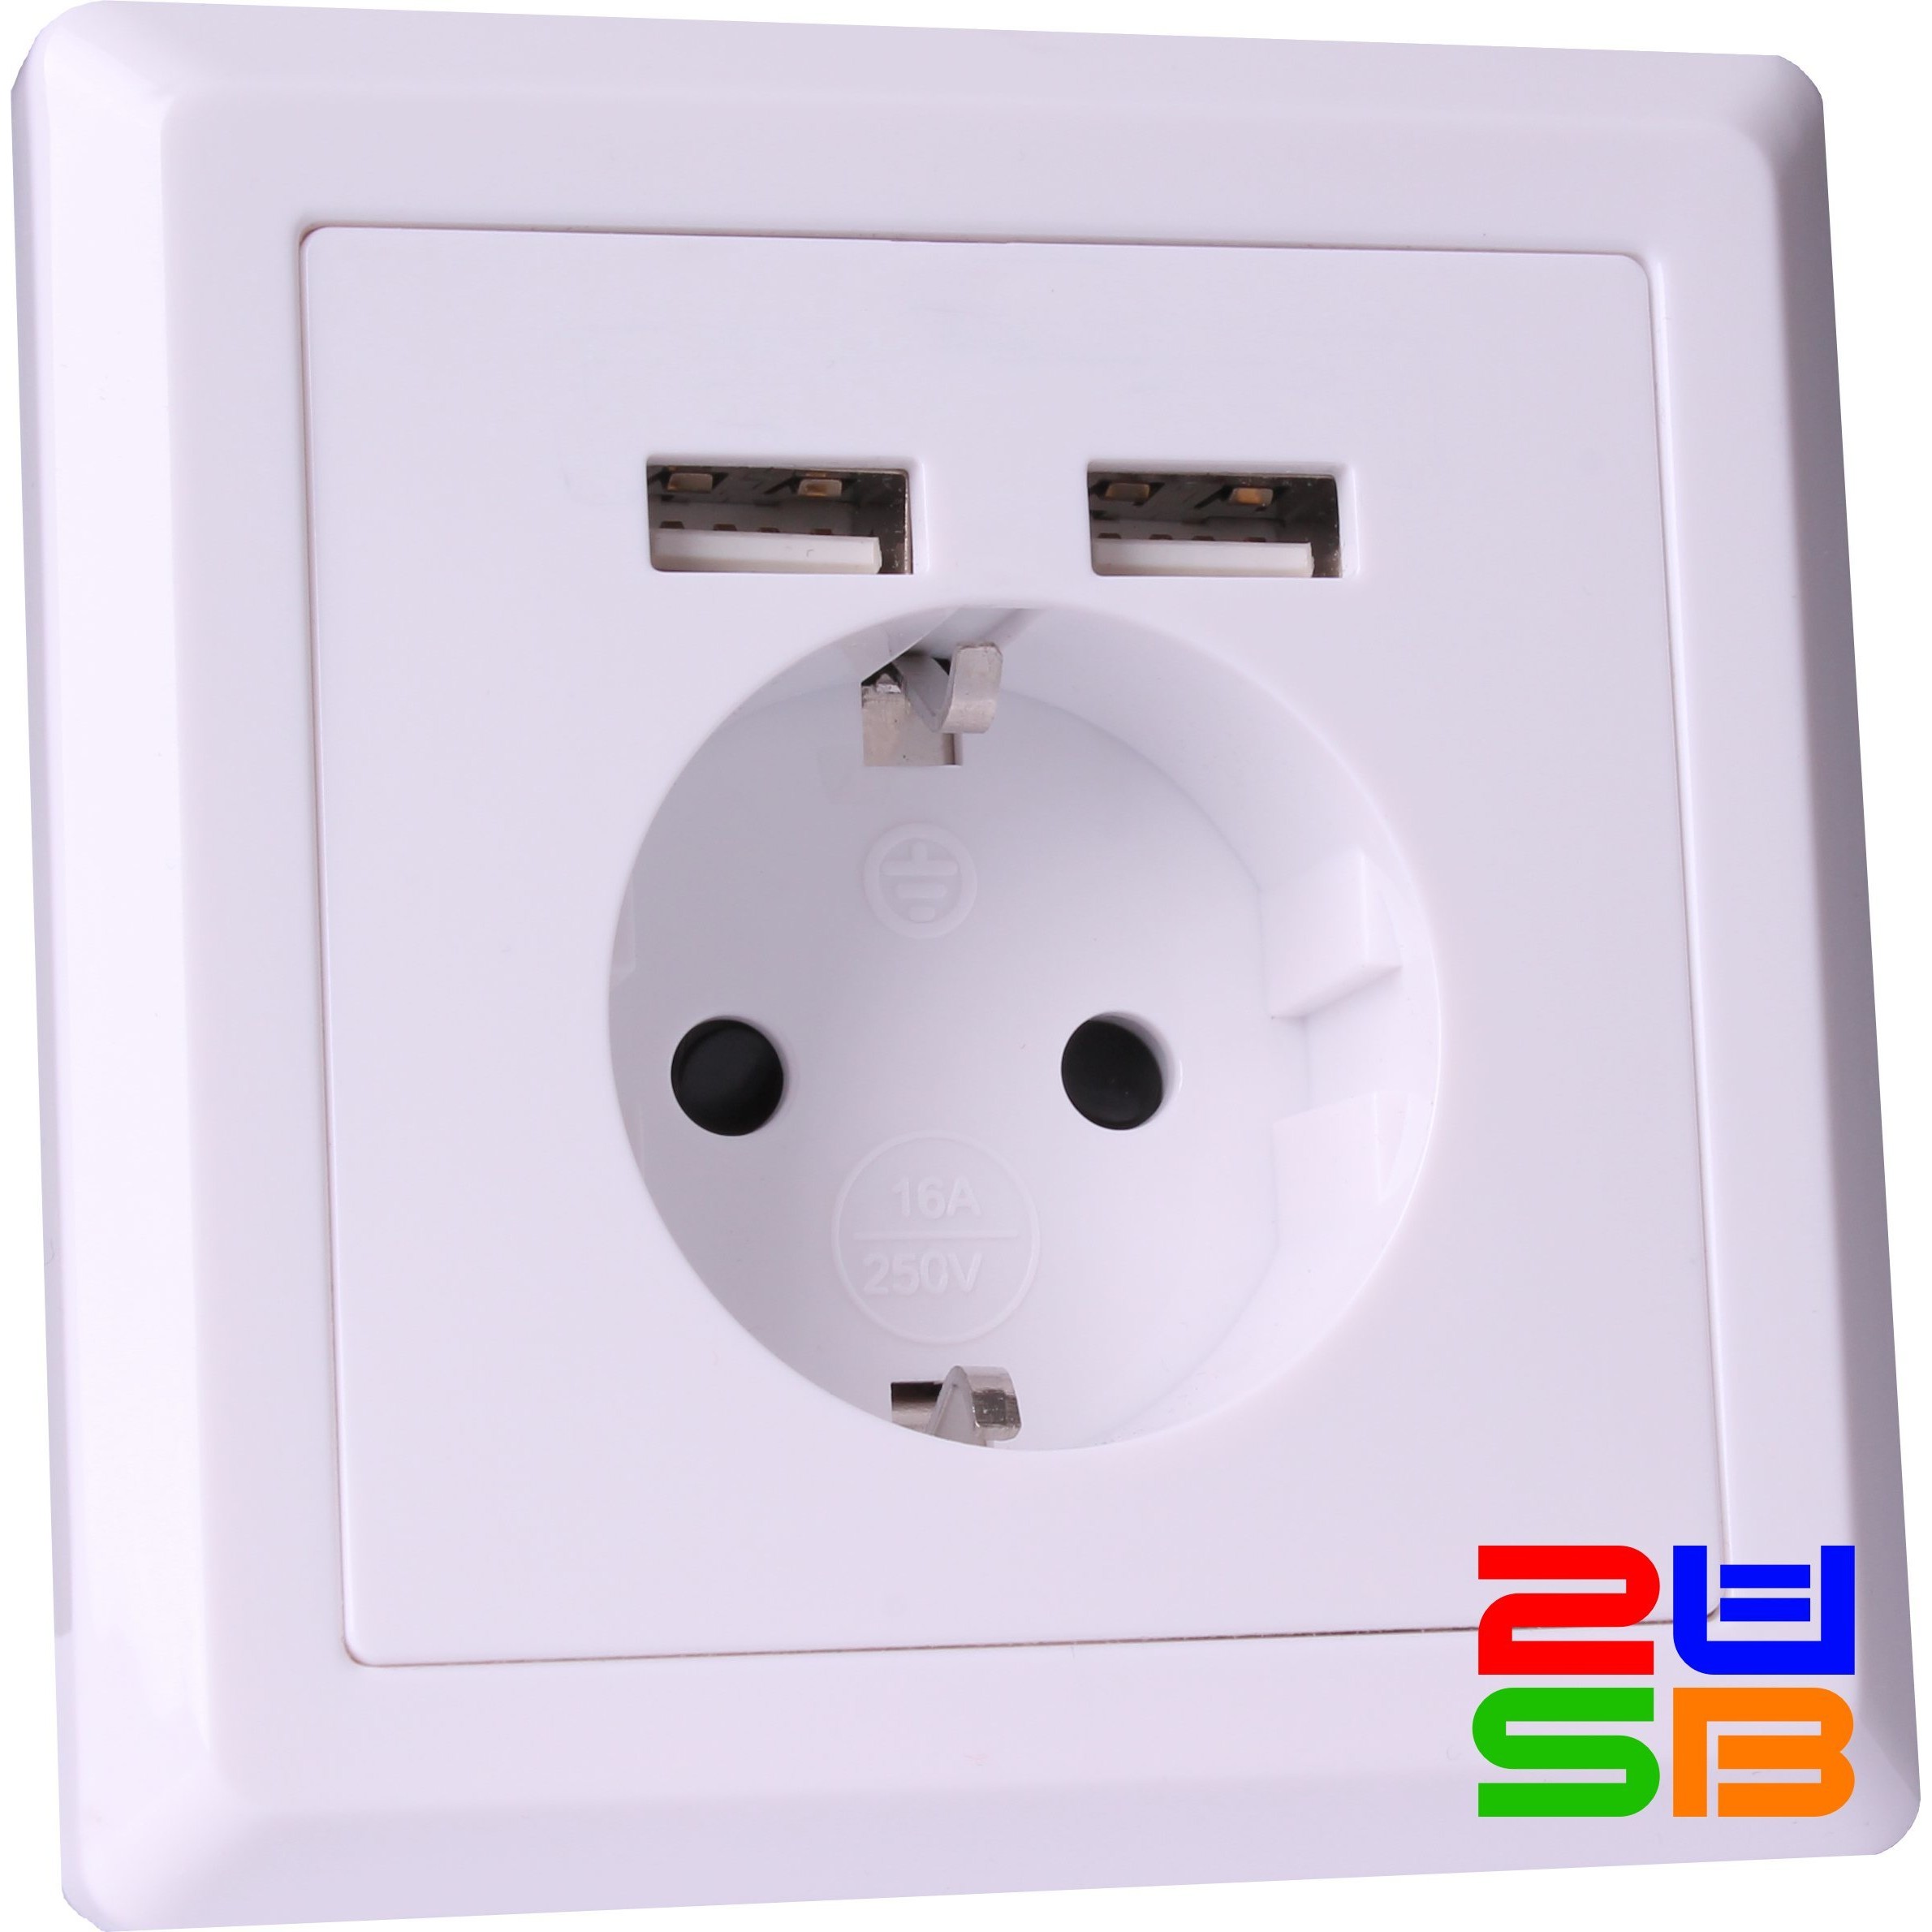 The 2USB wall outlet charges 3 devices in one socket